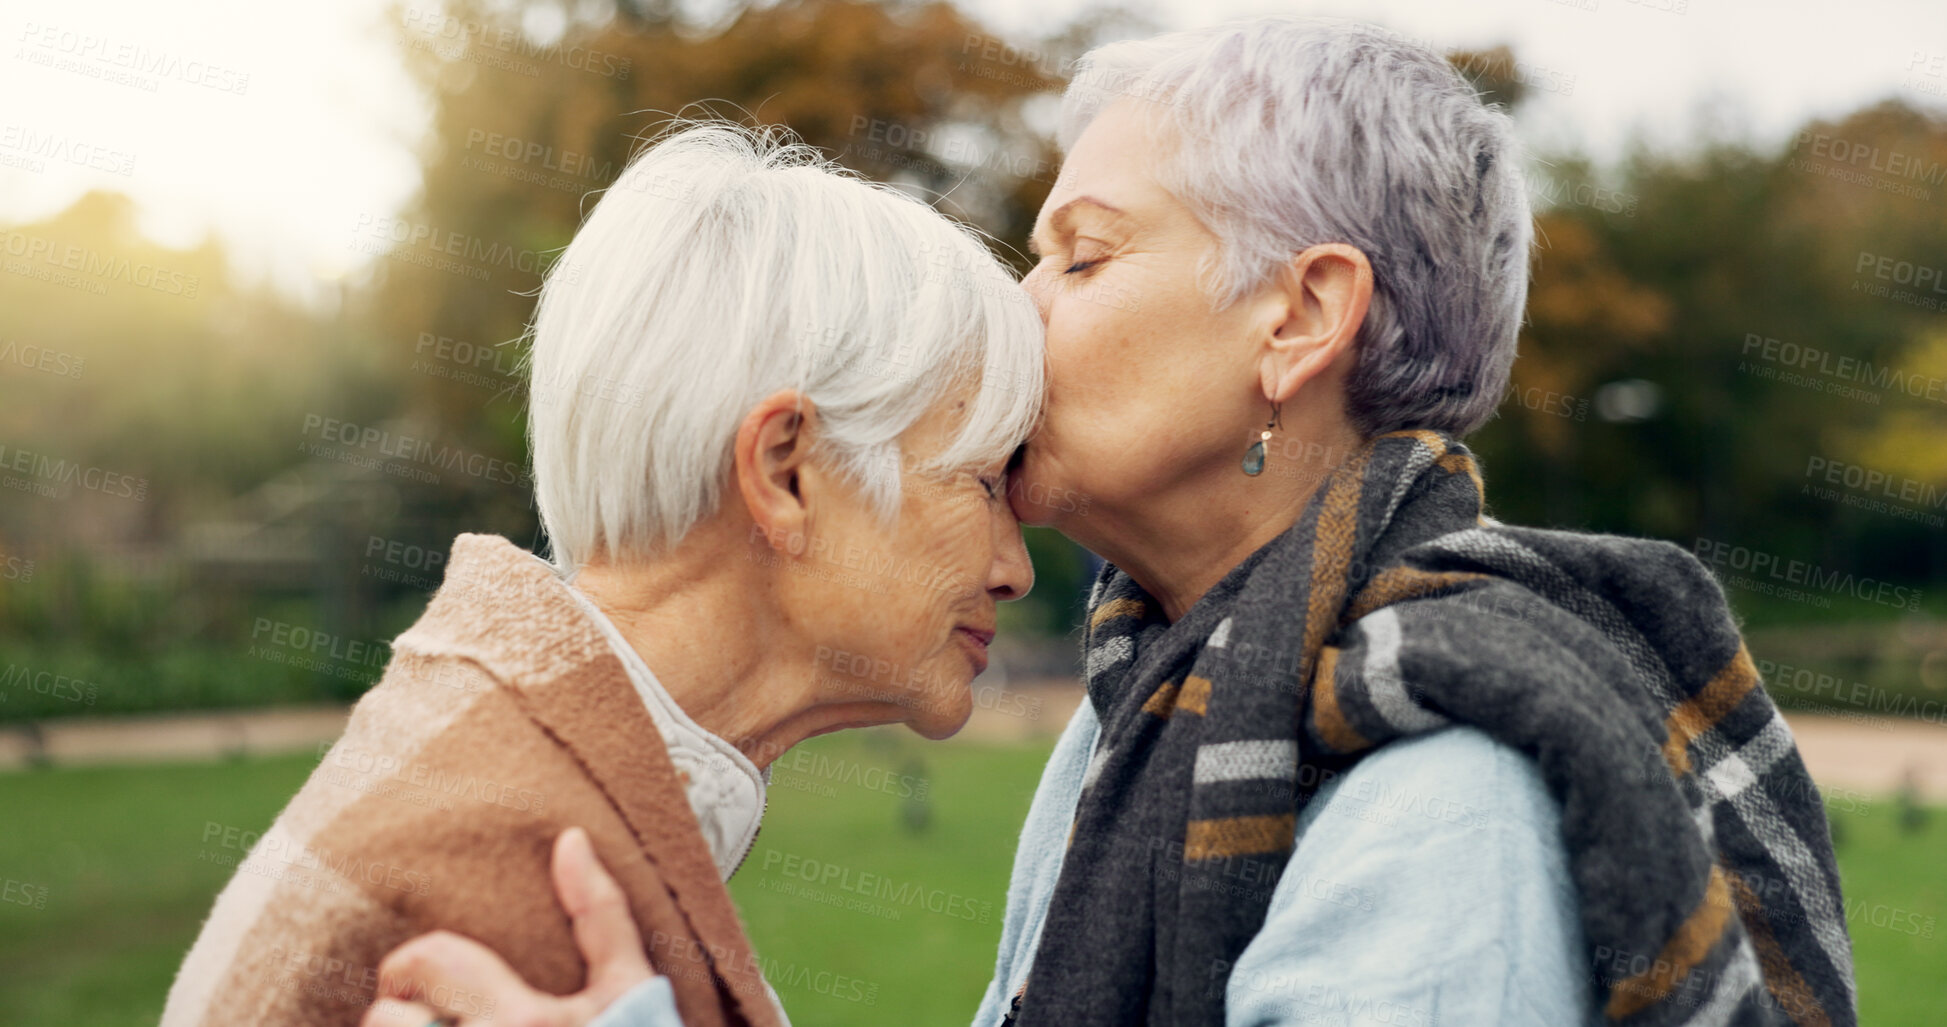 Buy stock photo Senior woman kissing her friend on the forehead for affection, romance and bonding on outdoor date. Nature, commitment and elderly female couple in retirement with intimate moment in garden or park.